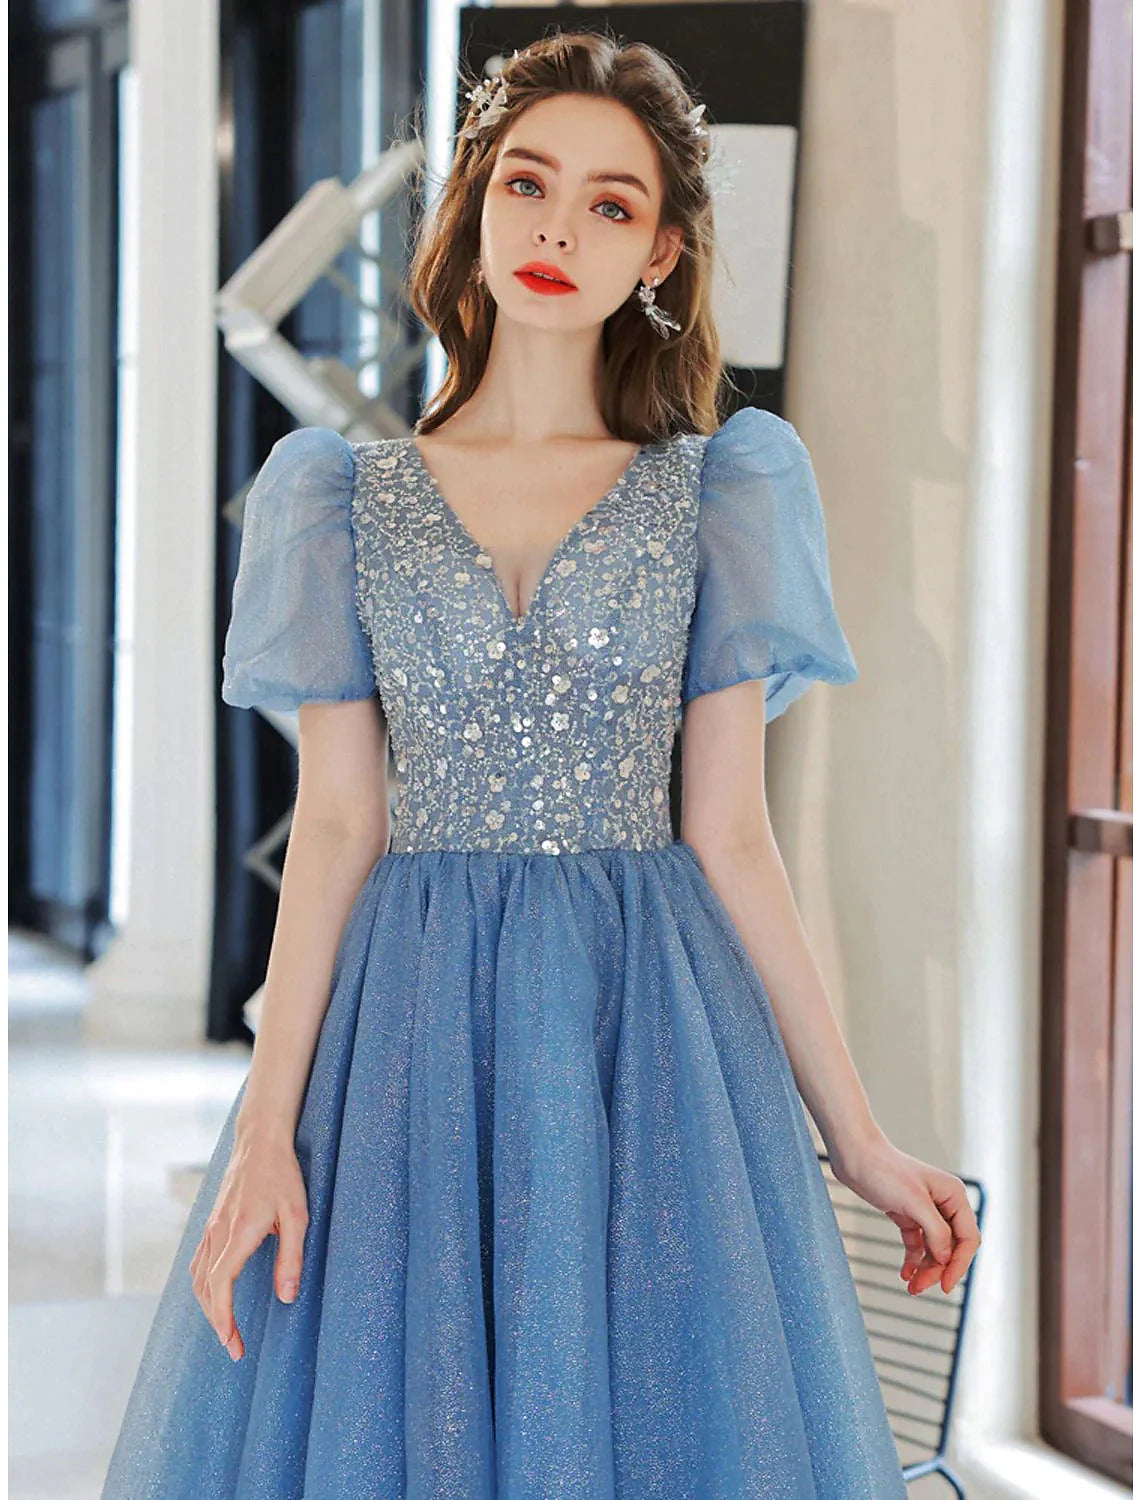 Ball Gown A-Line Evening Gown Floral Dress Prom Floor Length Short Sleeve V Neck Tulle with Glitter Beading Sequin